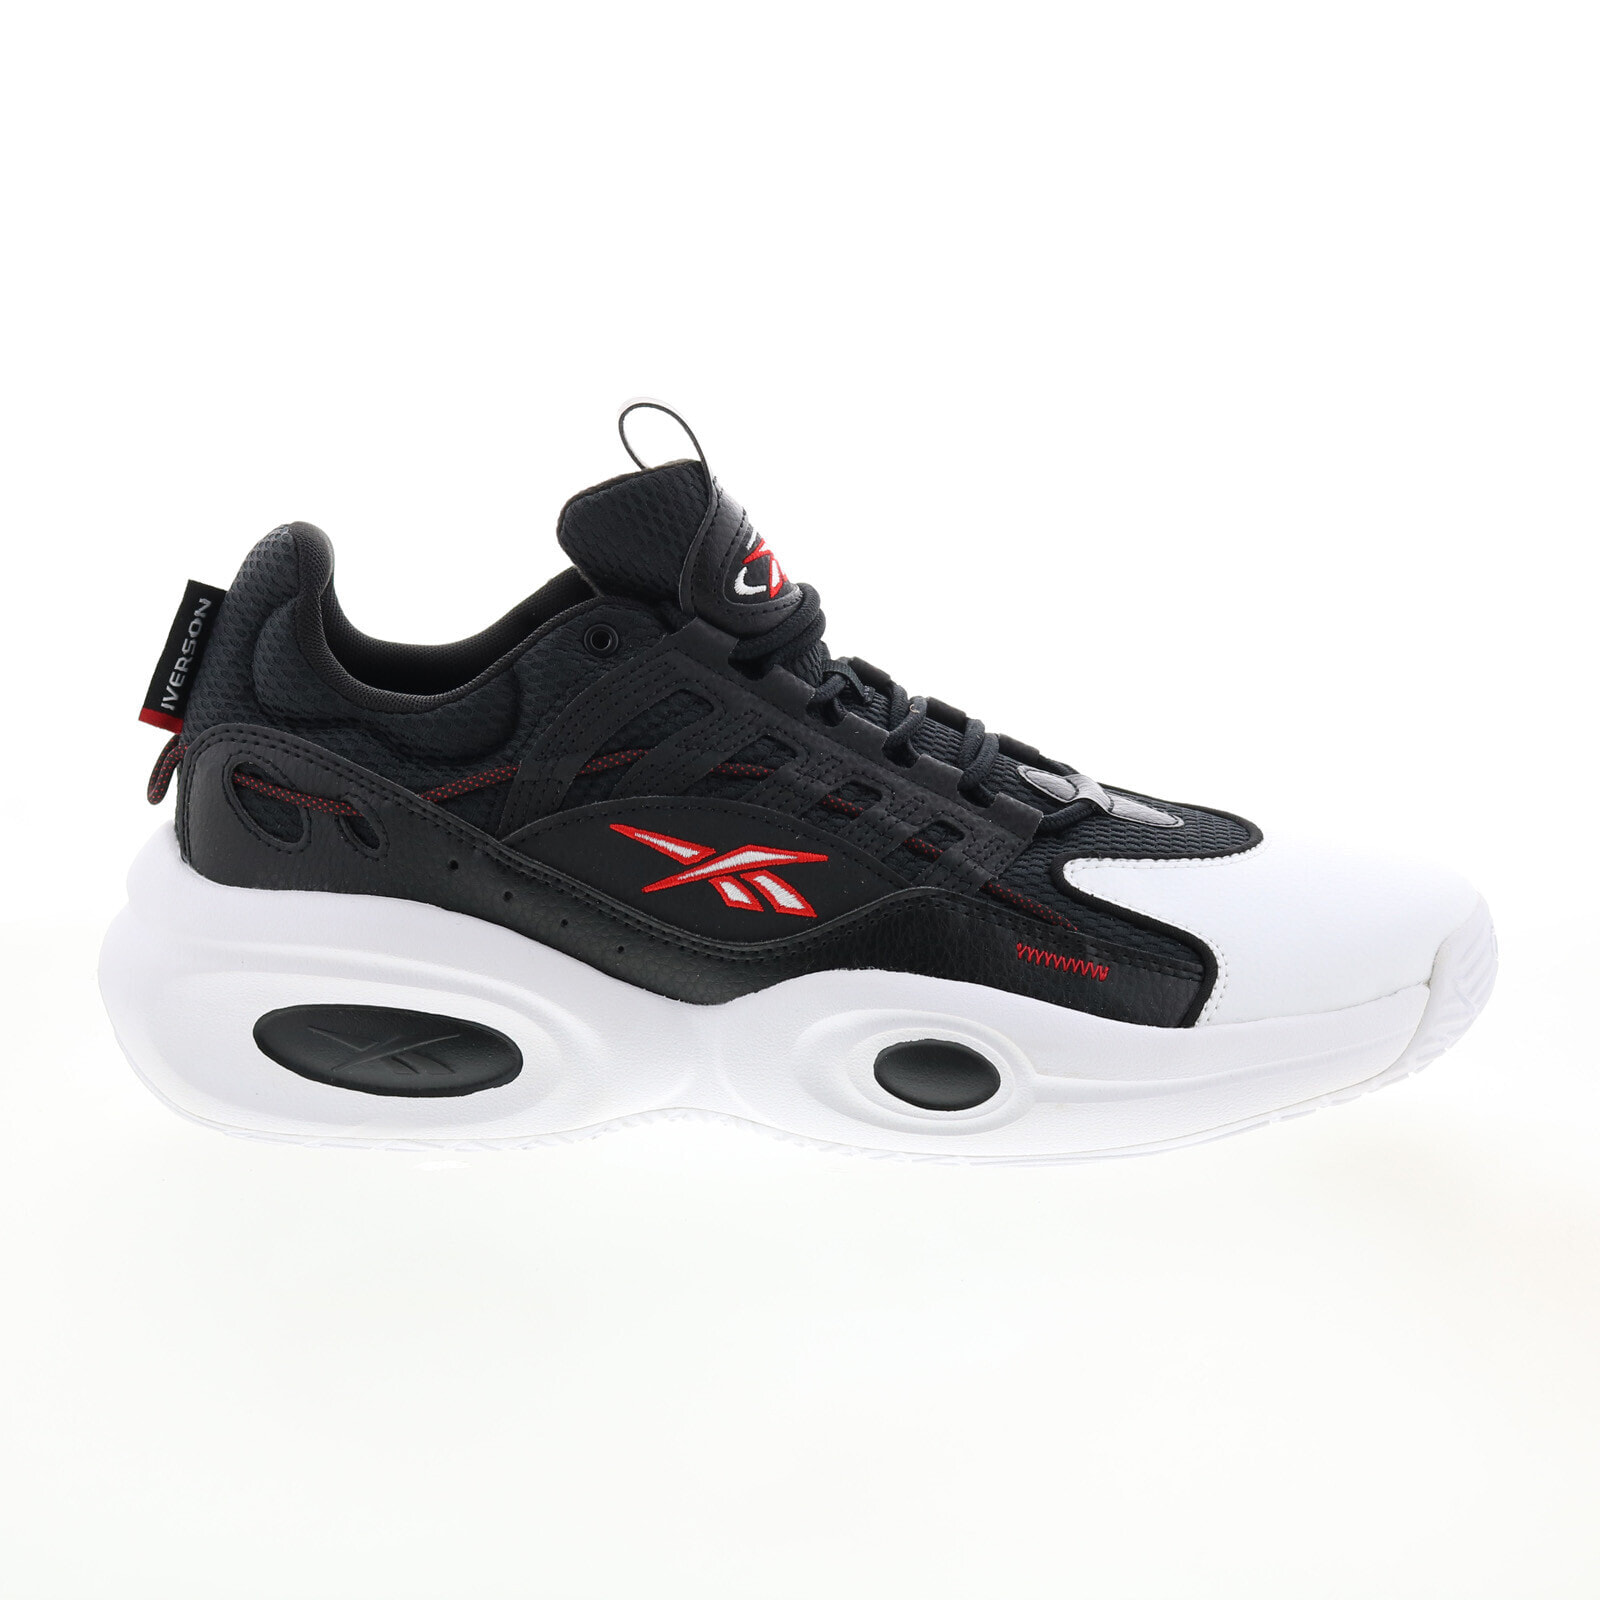 Reebok Solution Mid GY0931 Mens Black Synthetic Athletic Basketball Shoes